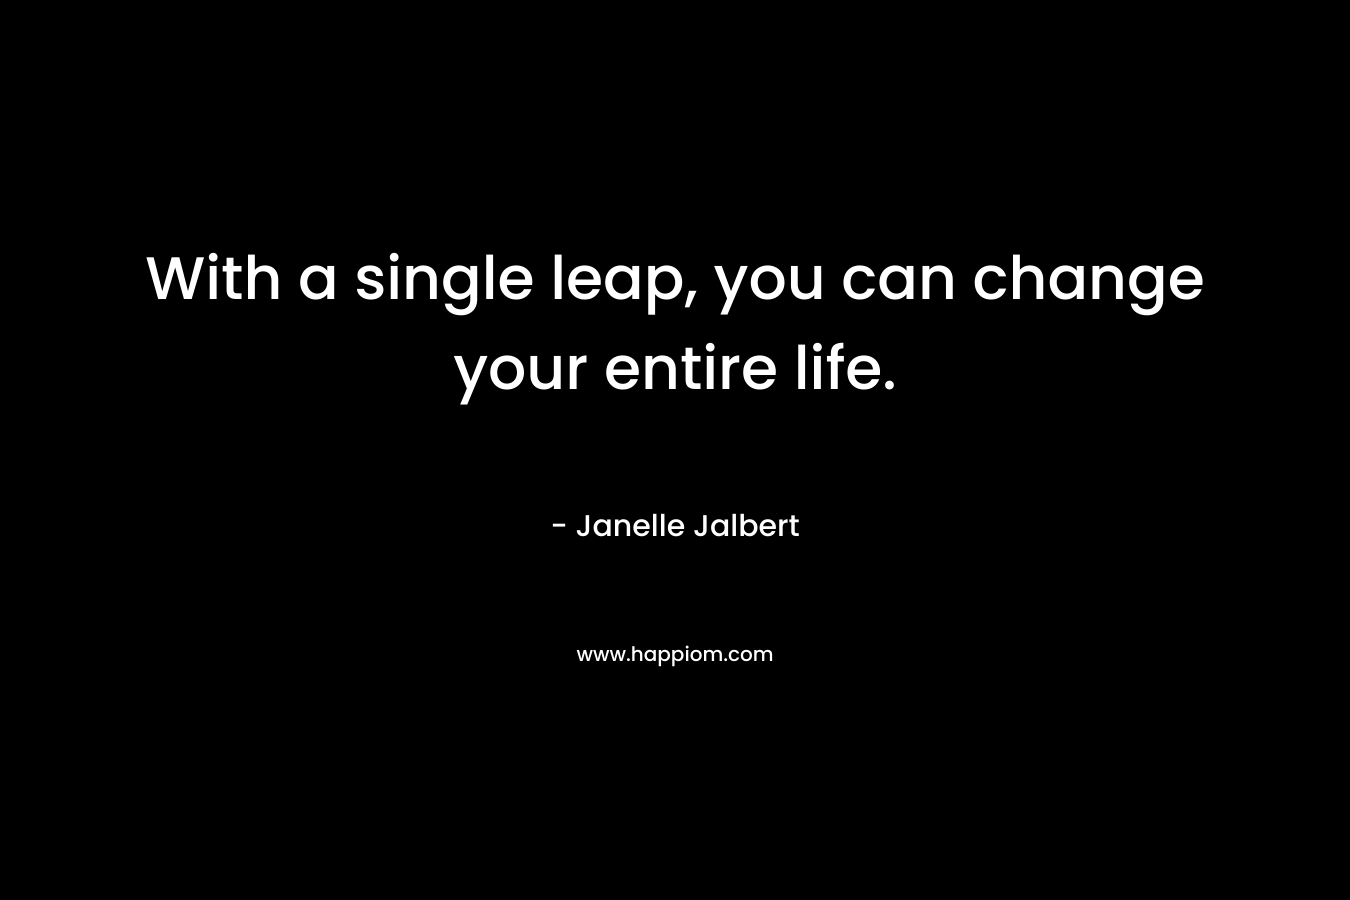 With a single leap, you can change your entire life.